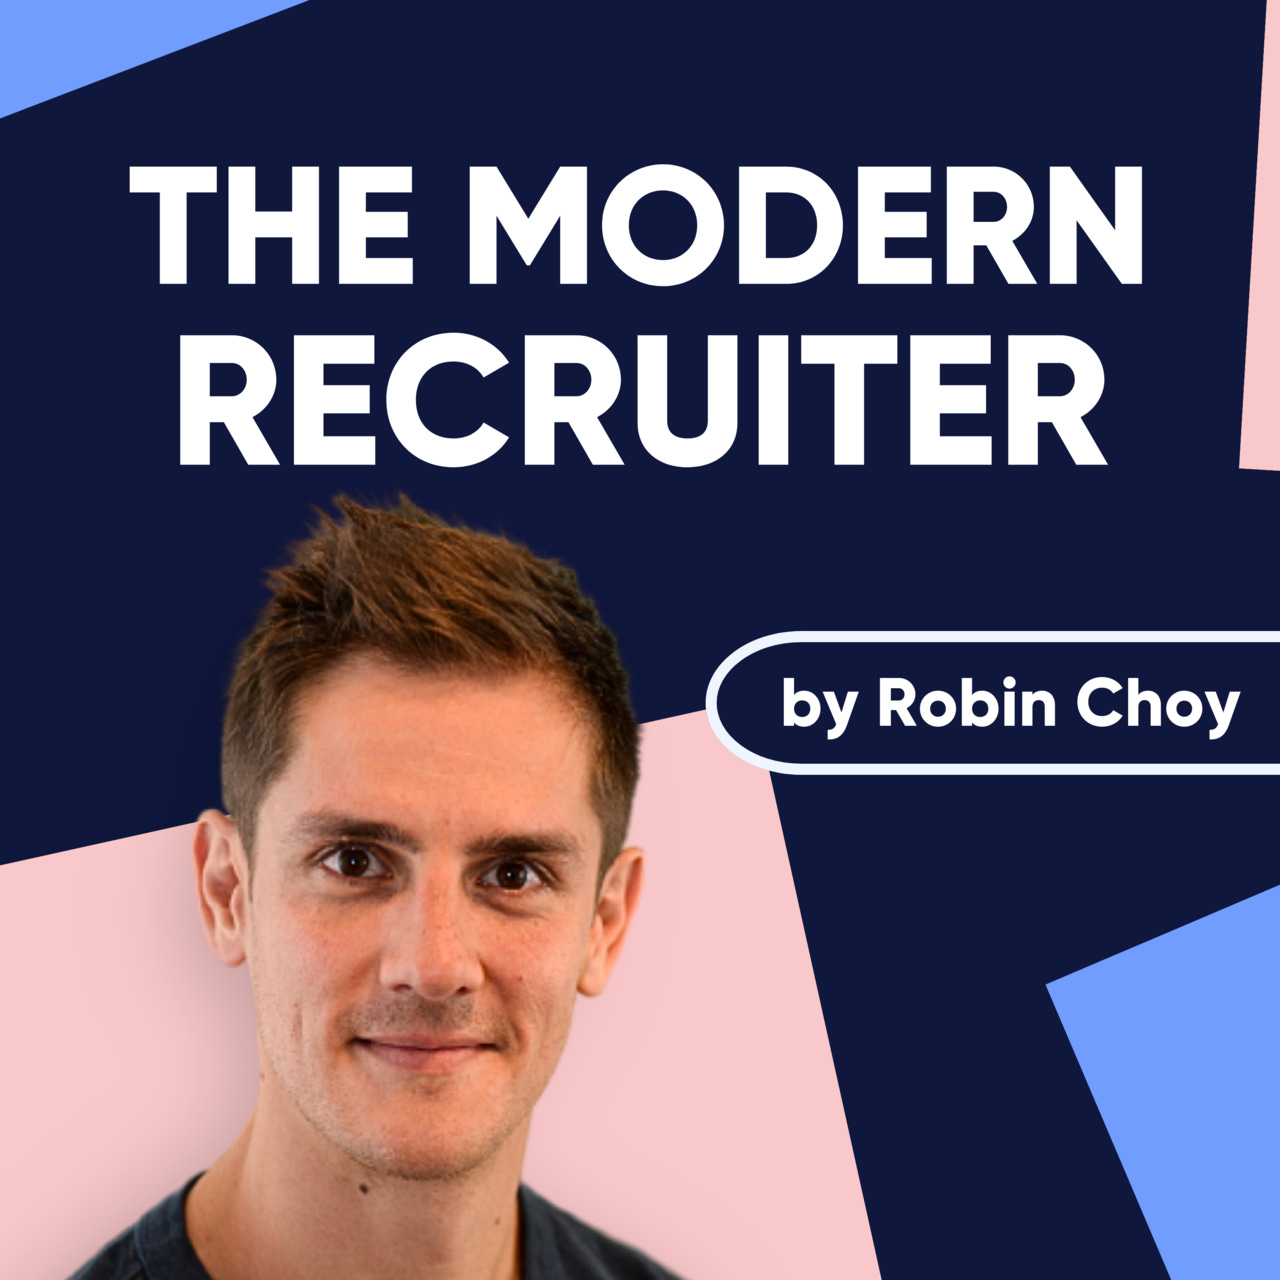 The Modern Recruiter #65: How to build a best-in-class interview process by coaching interviewers, Aaron Edwards, Senior Recruiter @ Orbis.